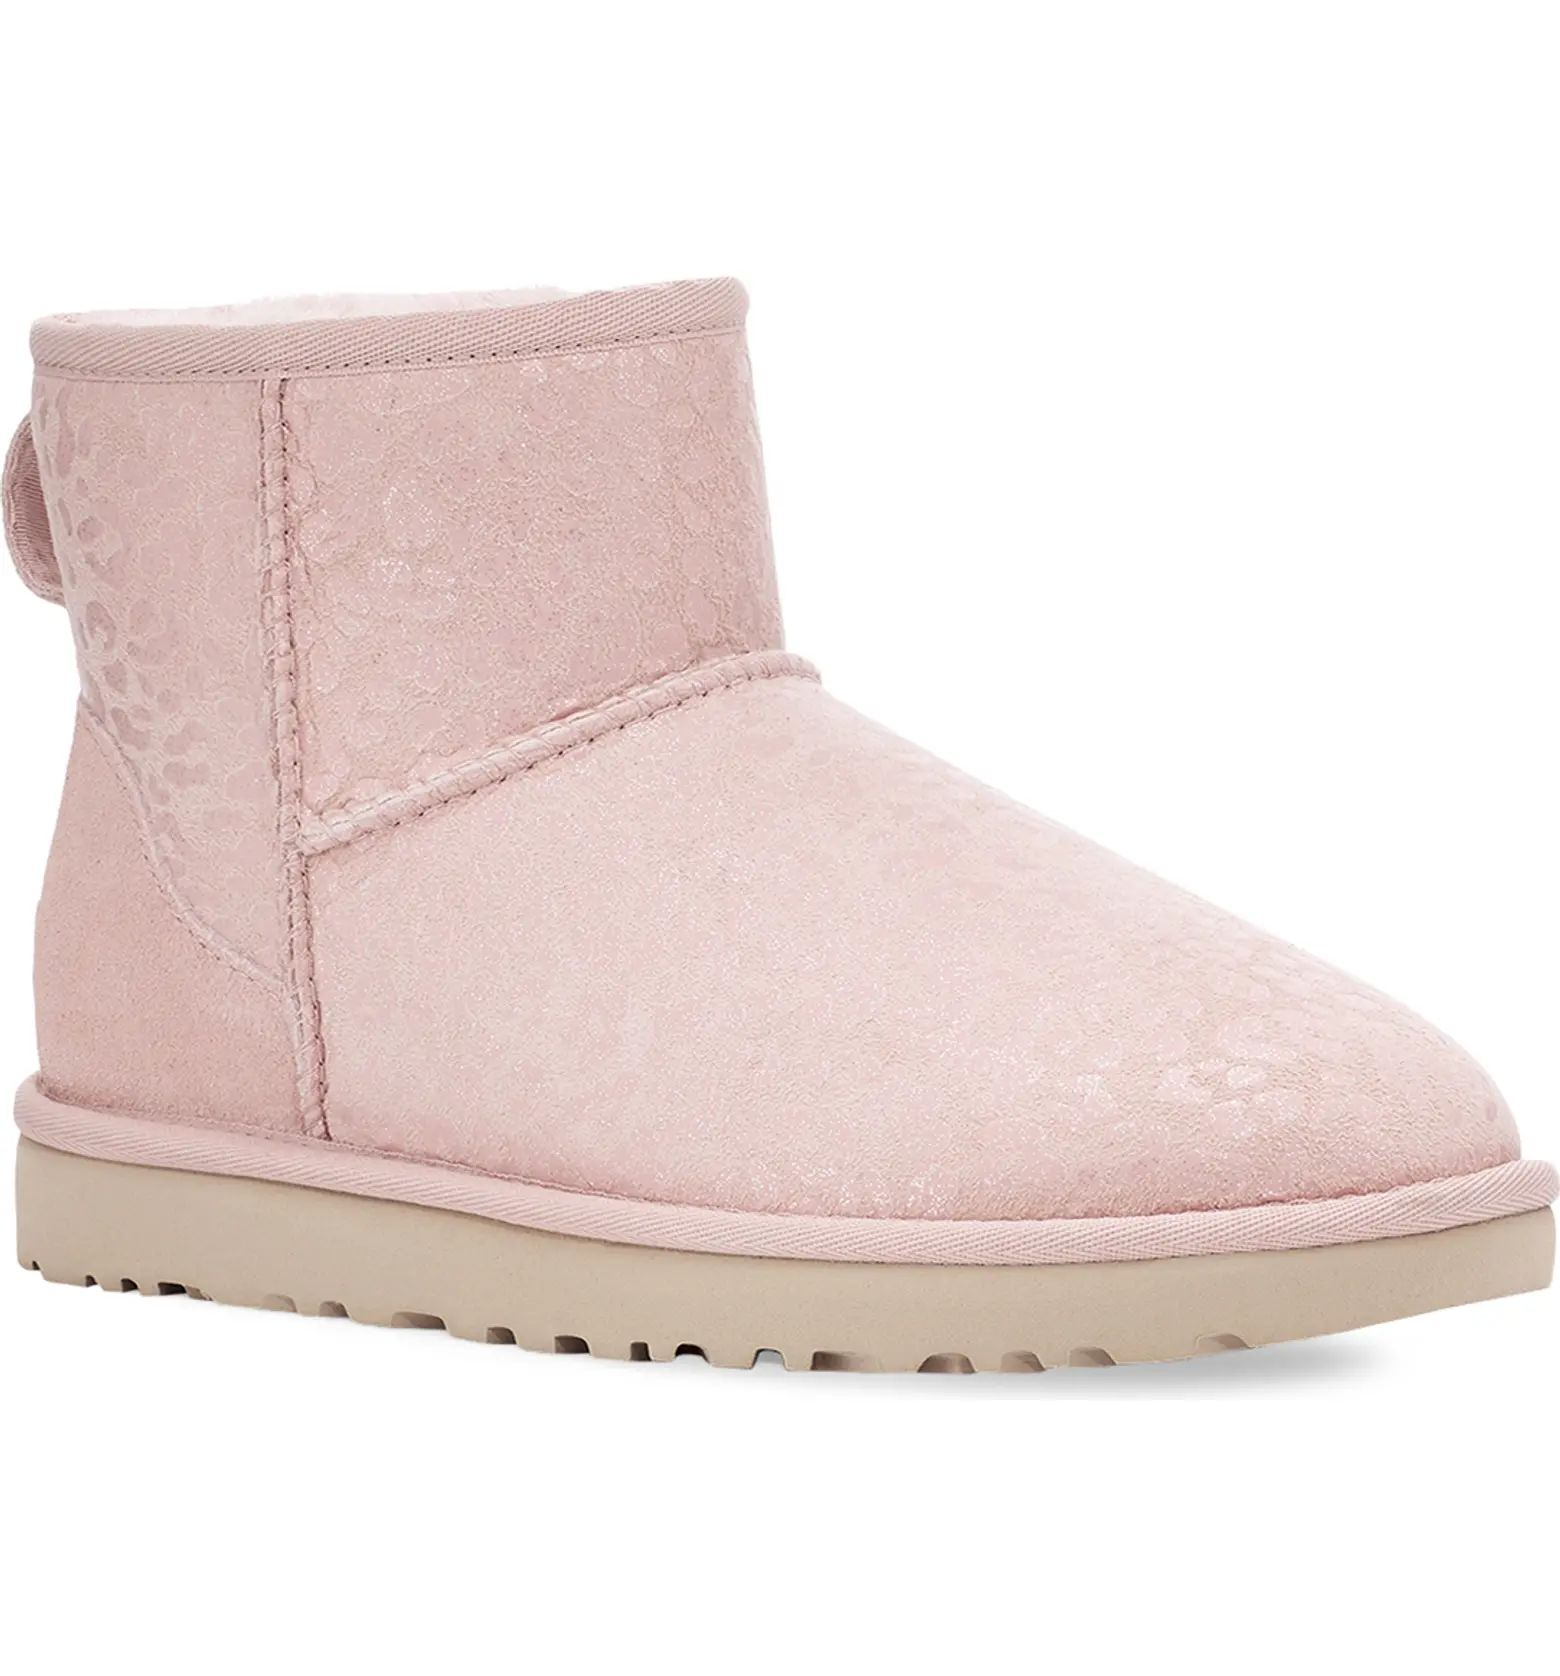 Classic Mini II Genuine Shearling Lined Boot | Nordstrom